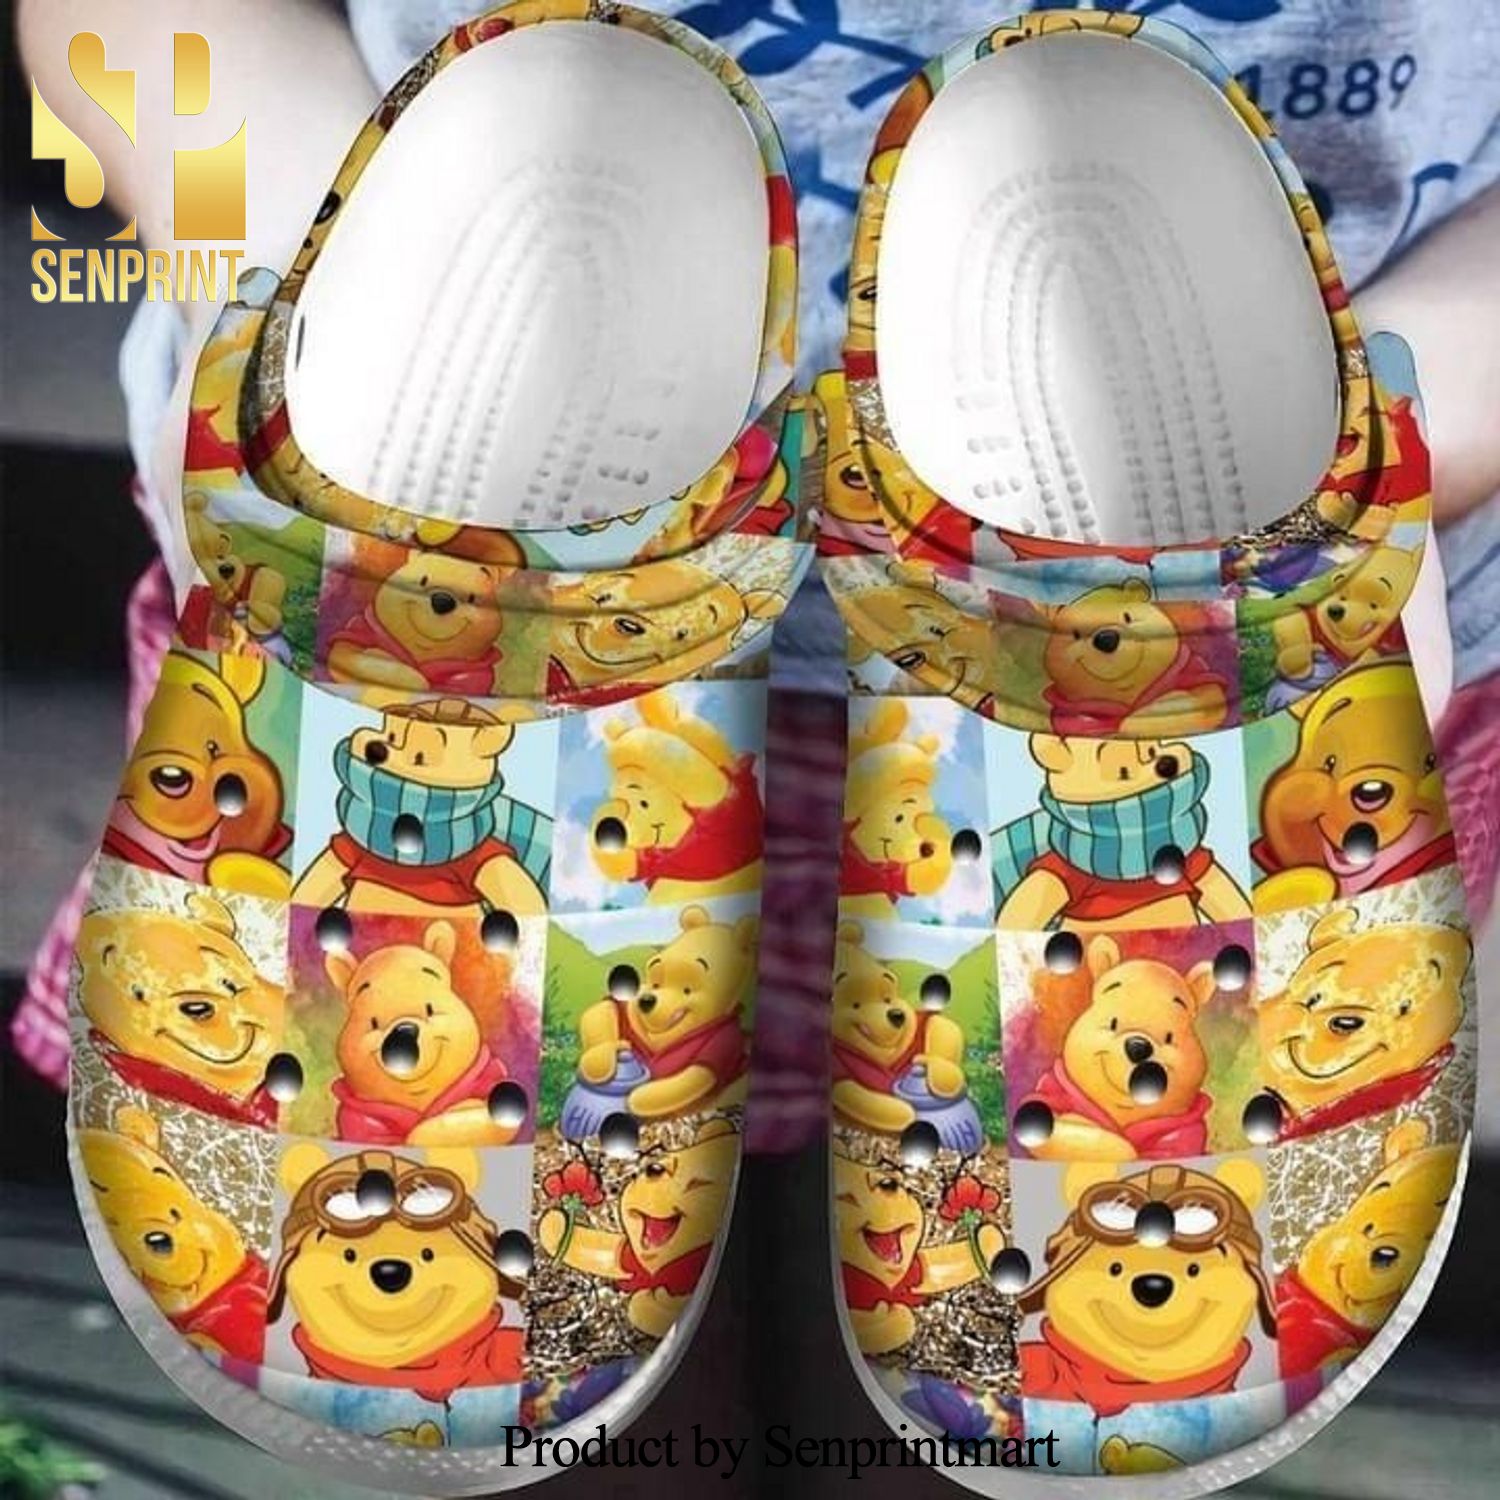 Bear Pooh Funny Winnie The Pooh For Lover Full Printing Crocs Sandals